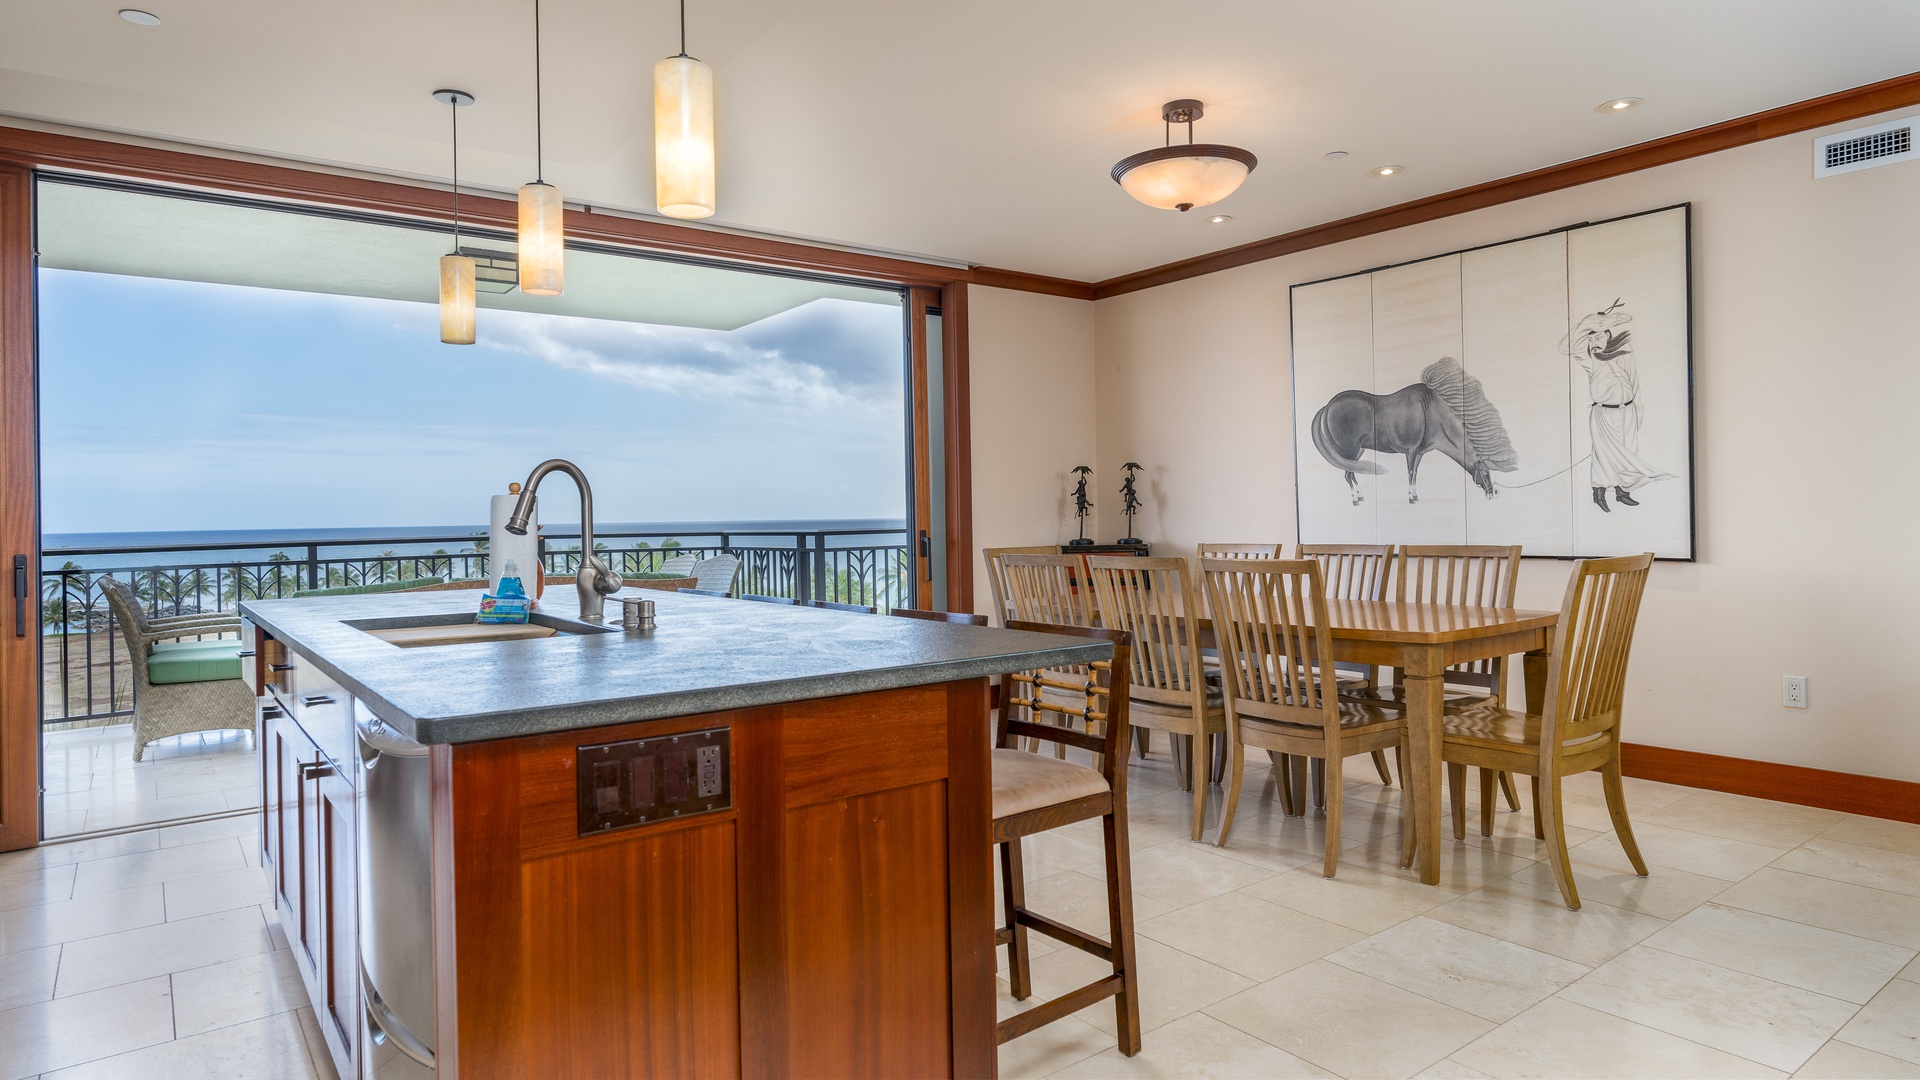 Kapolei Vacation Rentals, Ko Olina Beach Villas B701 - The views of the island and ocean breezes will relax and renew.